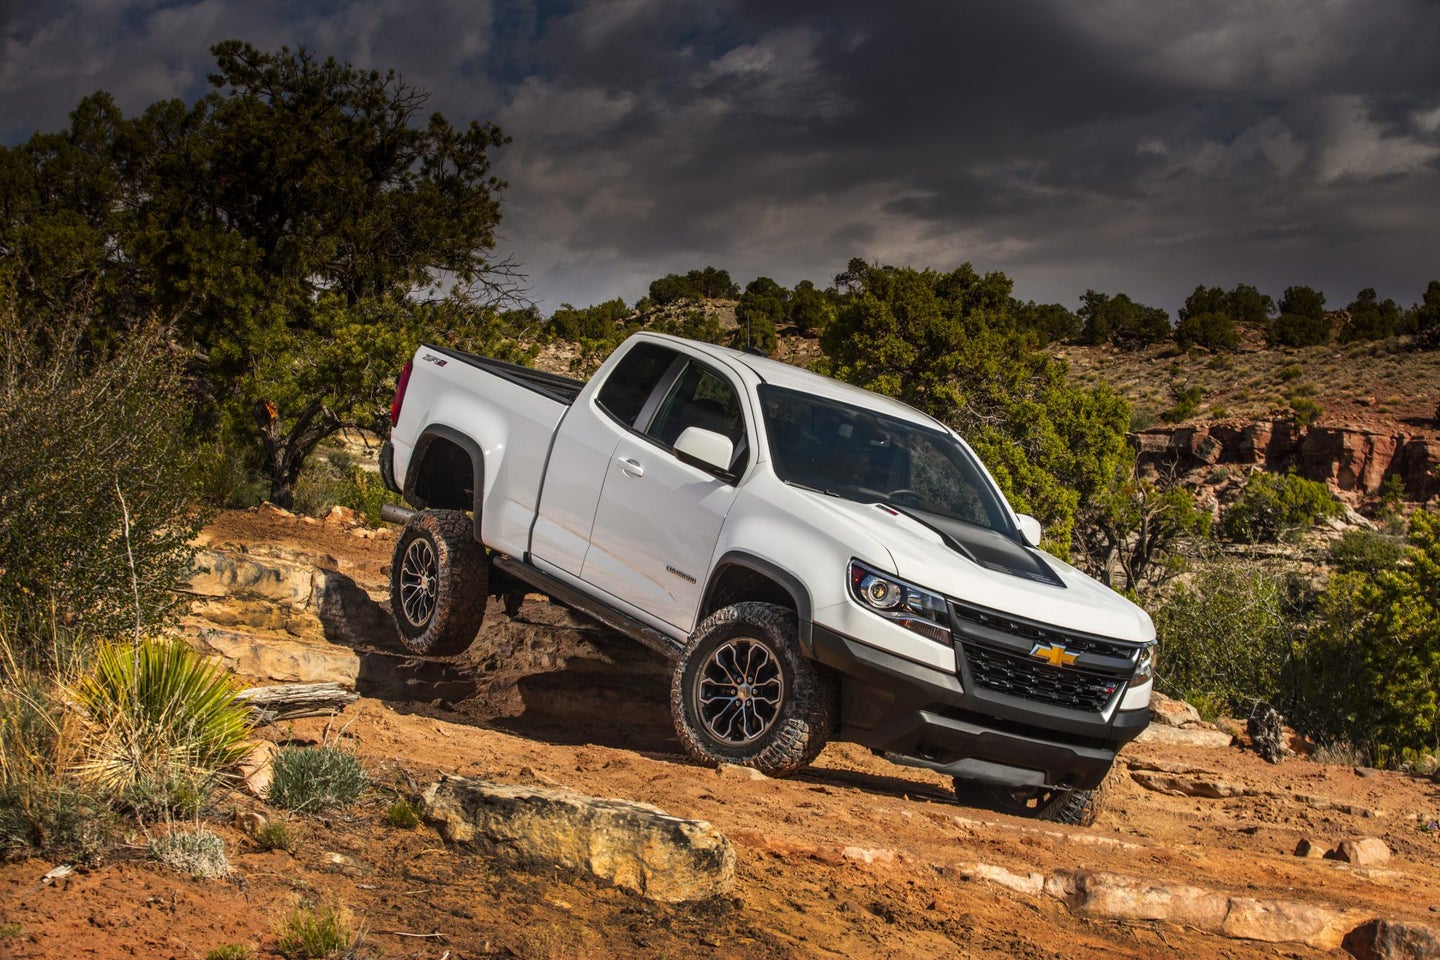 Chevrolet Colorado ZR2 Side Curtain Airbags Are Deploying Unexpectedly While Off-Roading